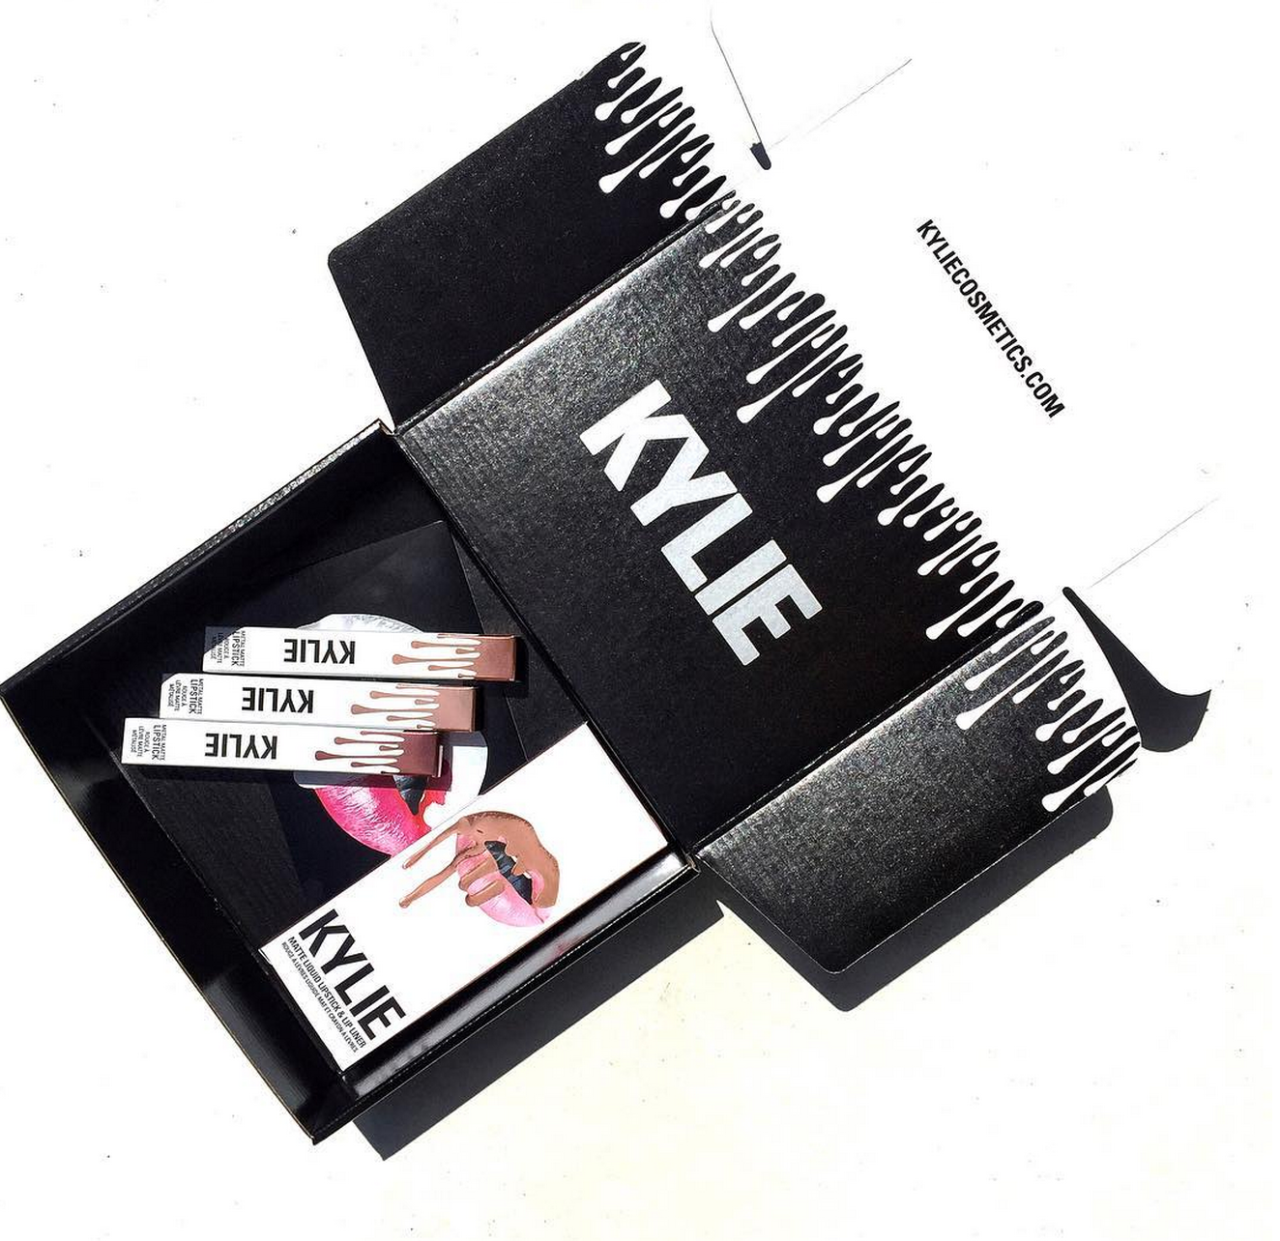 Kylie Cosmetics Rebrand Packaging Designer Kate Doheny — Kate Doheny